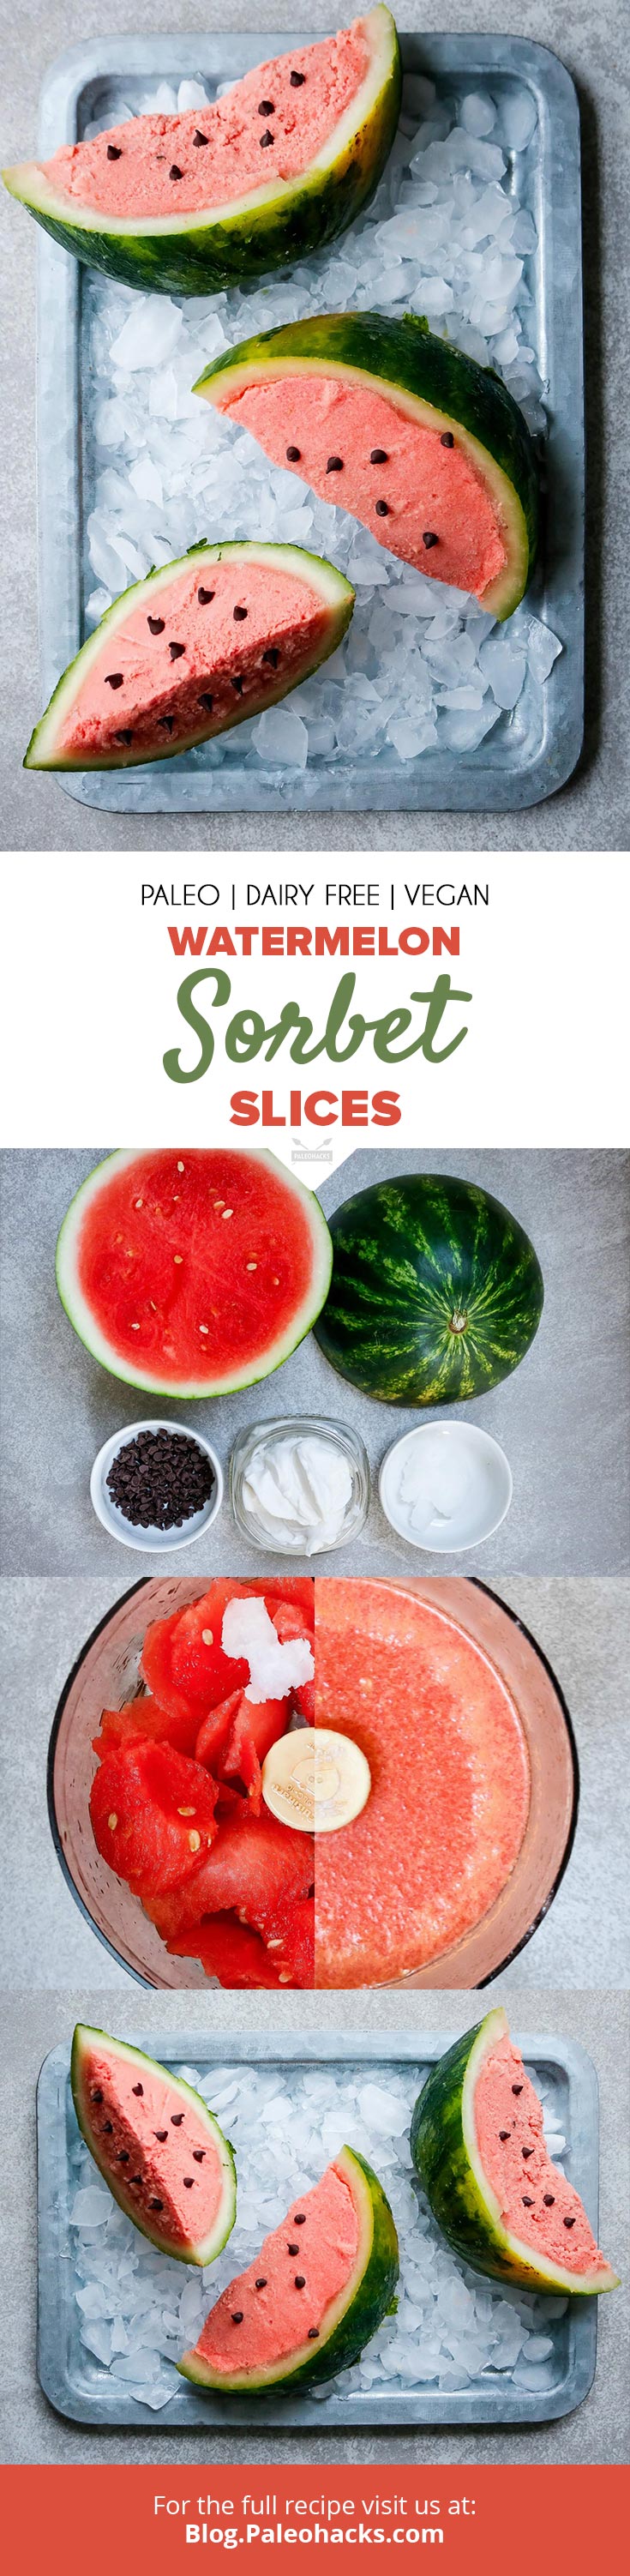 Cool off with these Watermelon Coconut Sorbet Slices with chocolate chip “seeds” and a hint of creamy coconut.